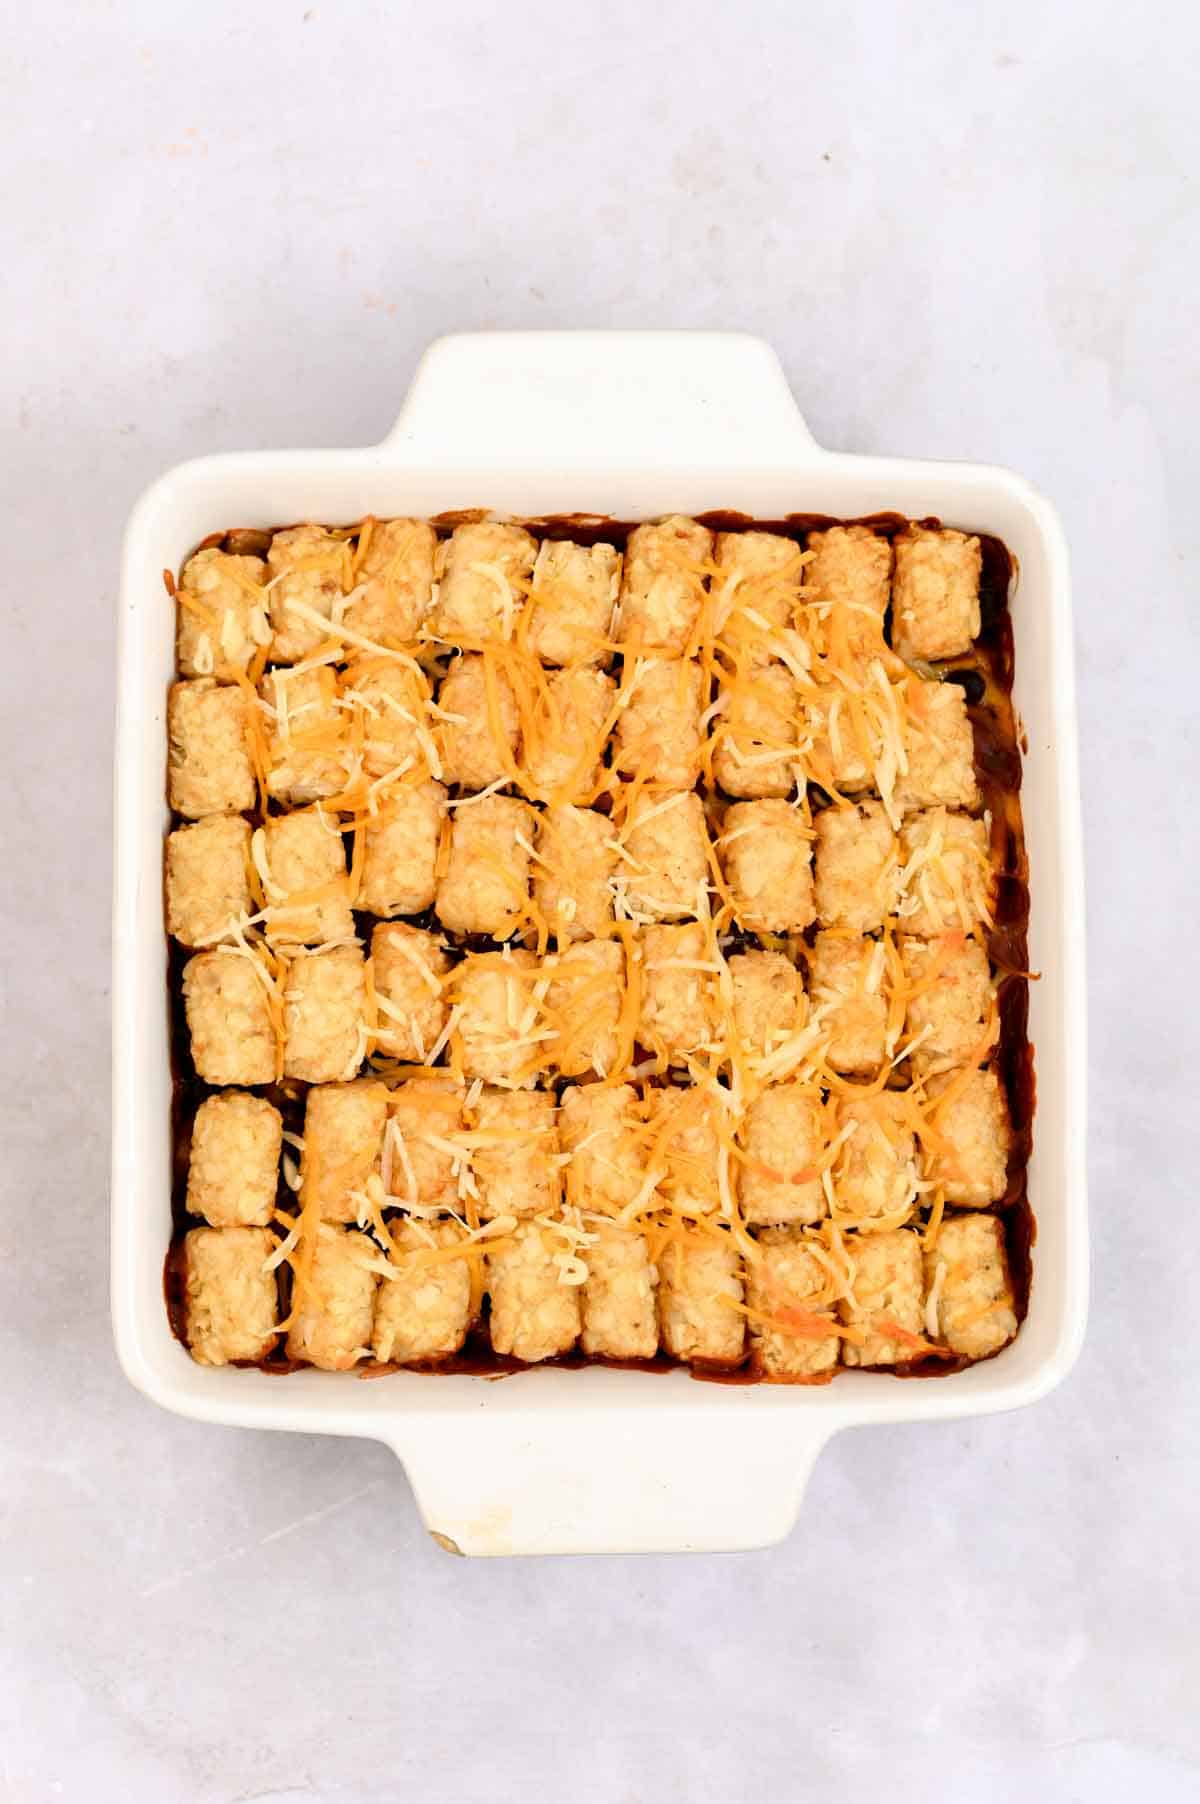 Golden tater tots with melted cheese on top lined up in a row in a white-handled baking dish.